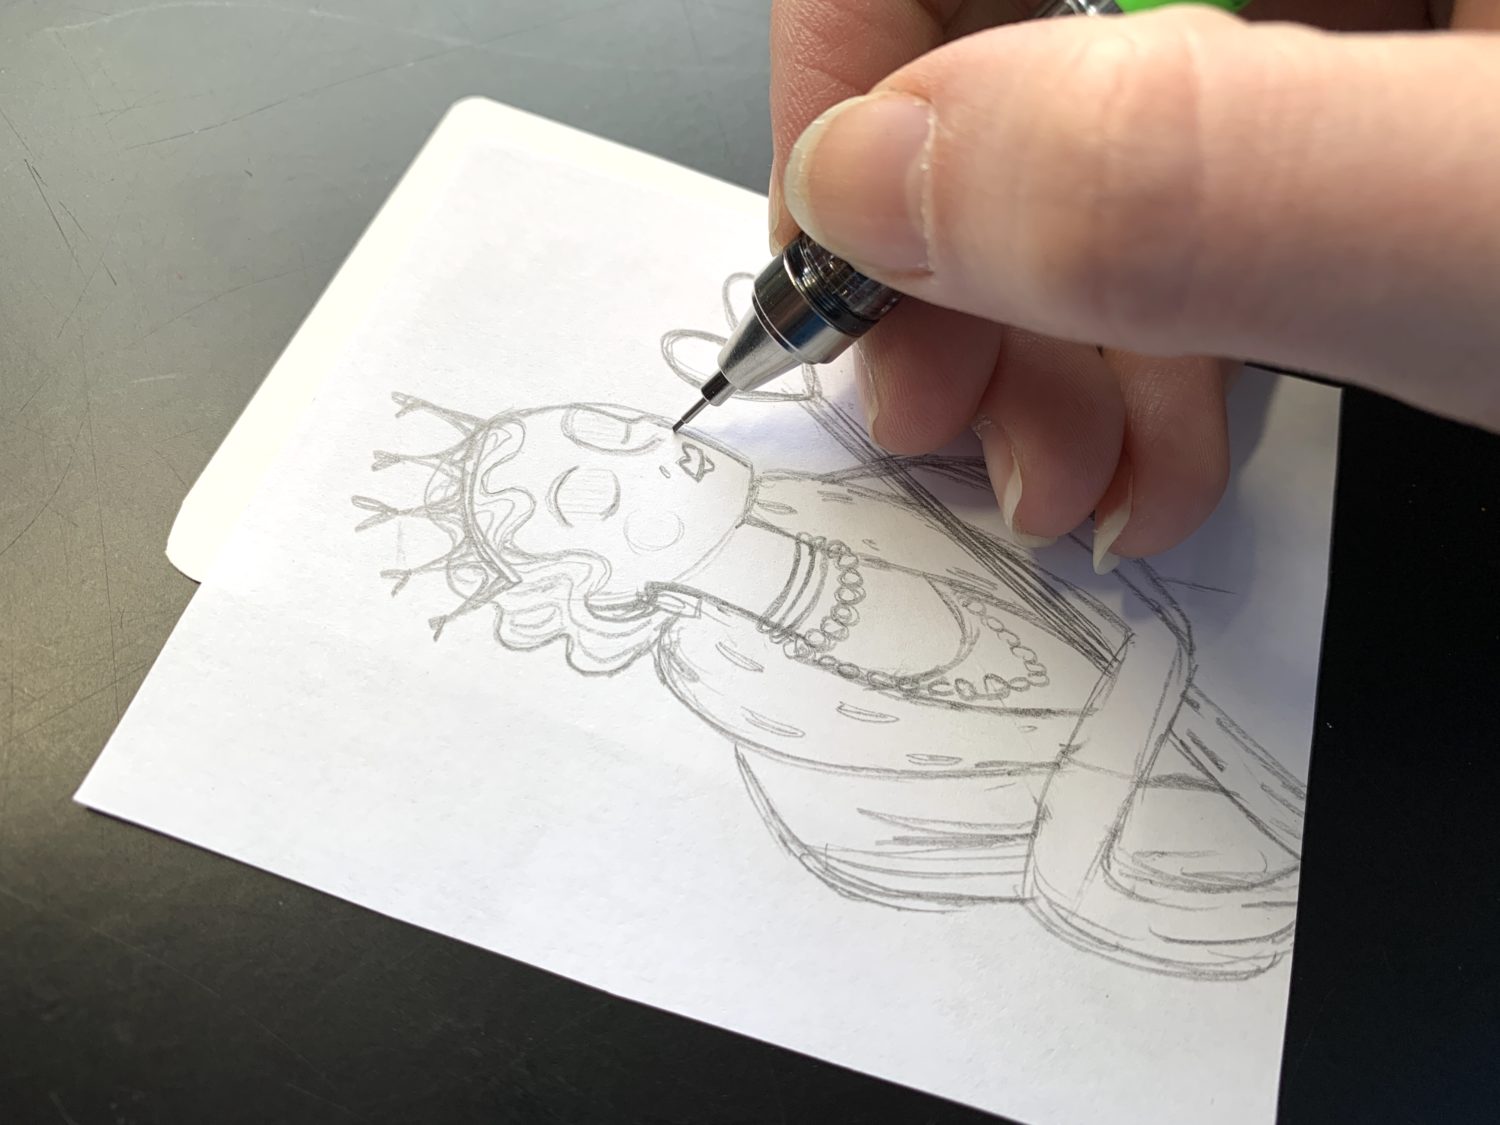 Learn helpful arts tips and tricks using @tombowusa products. Follow this tutorial by @LePereLetters. #tombow #arttips